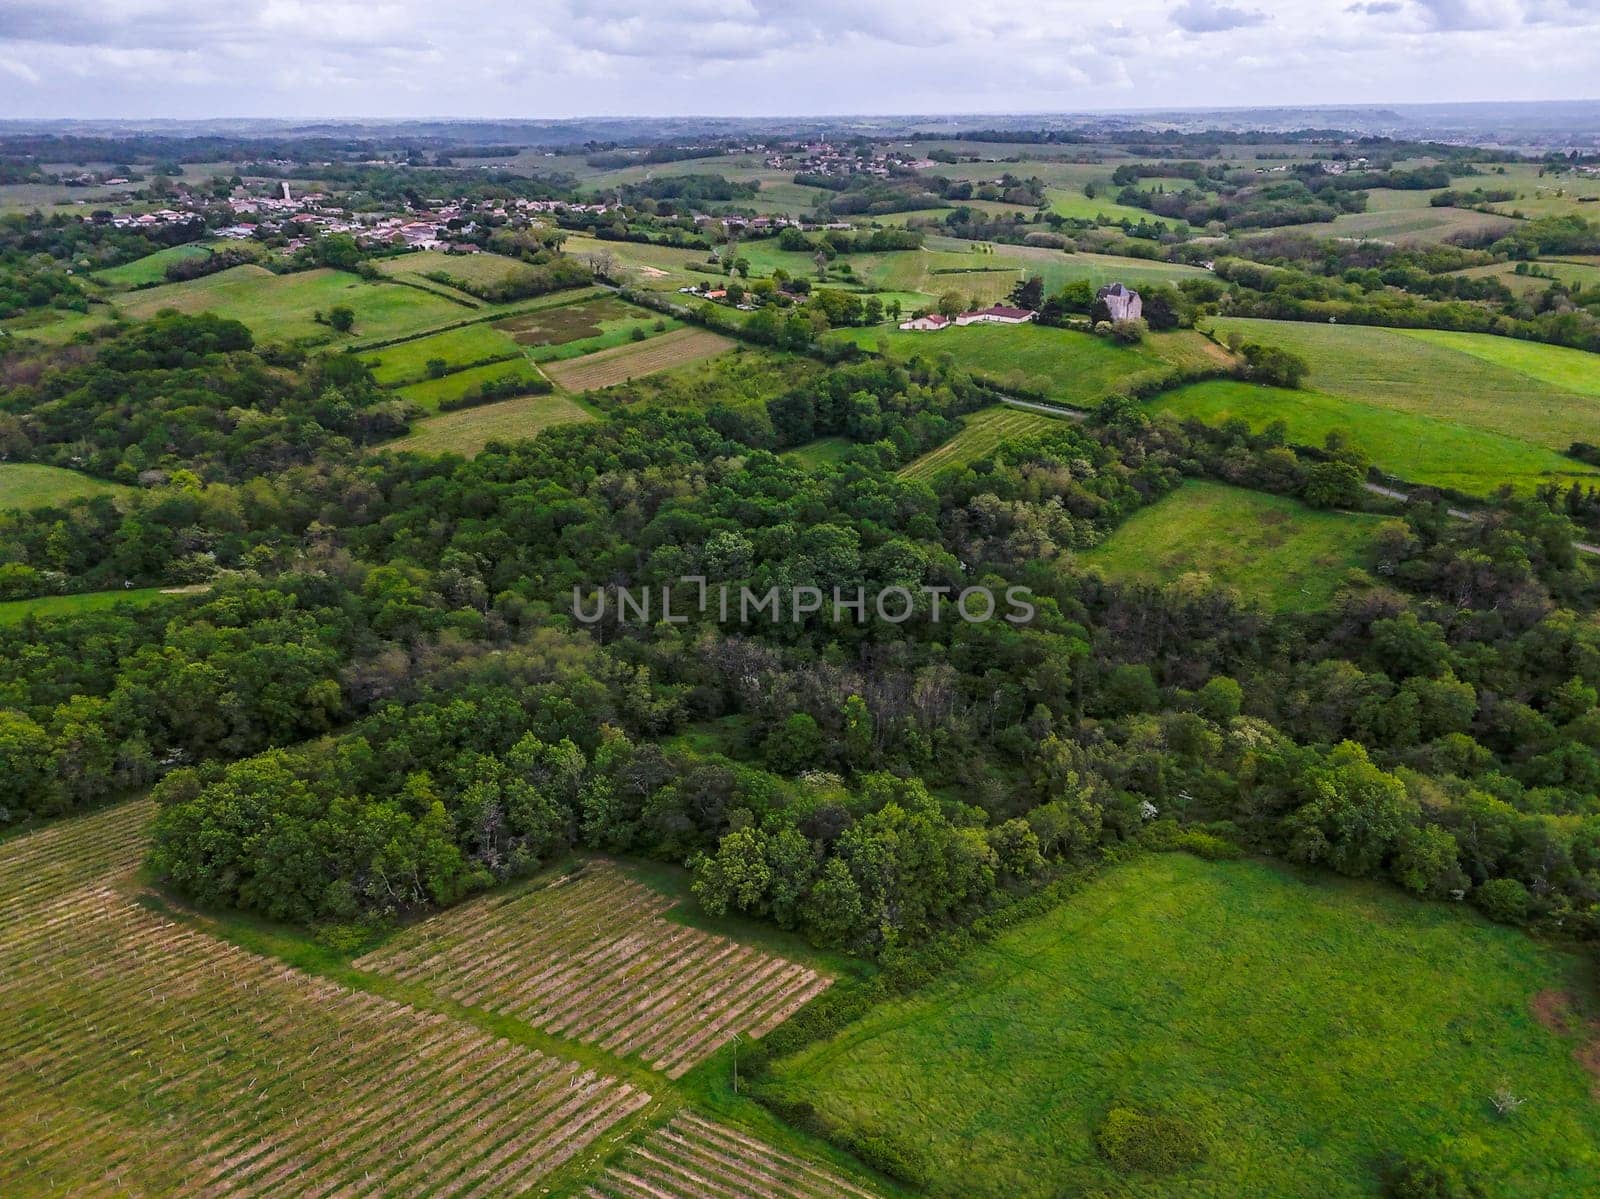 Aerial view of Bordeaux vineyard at spring under cloudy sky, Rions, Gironde, France. High quality photo